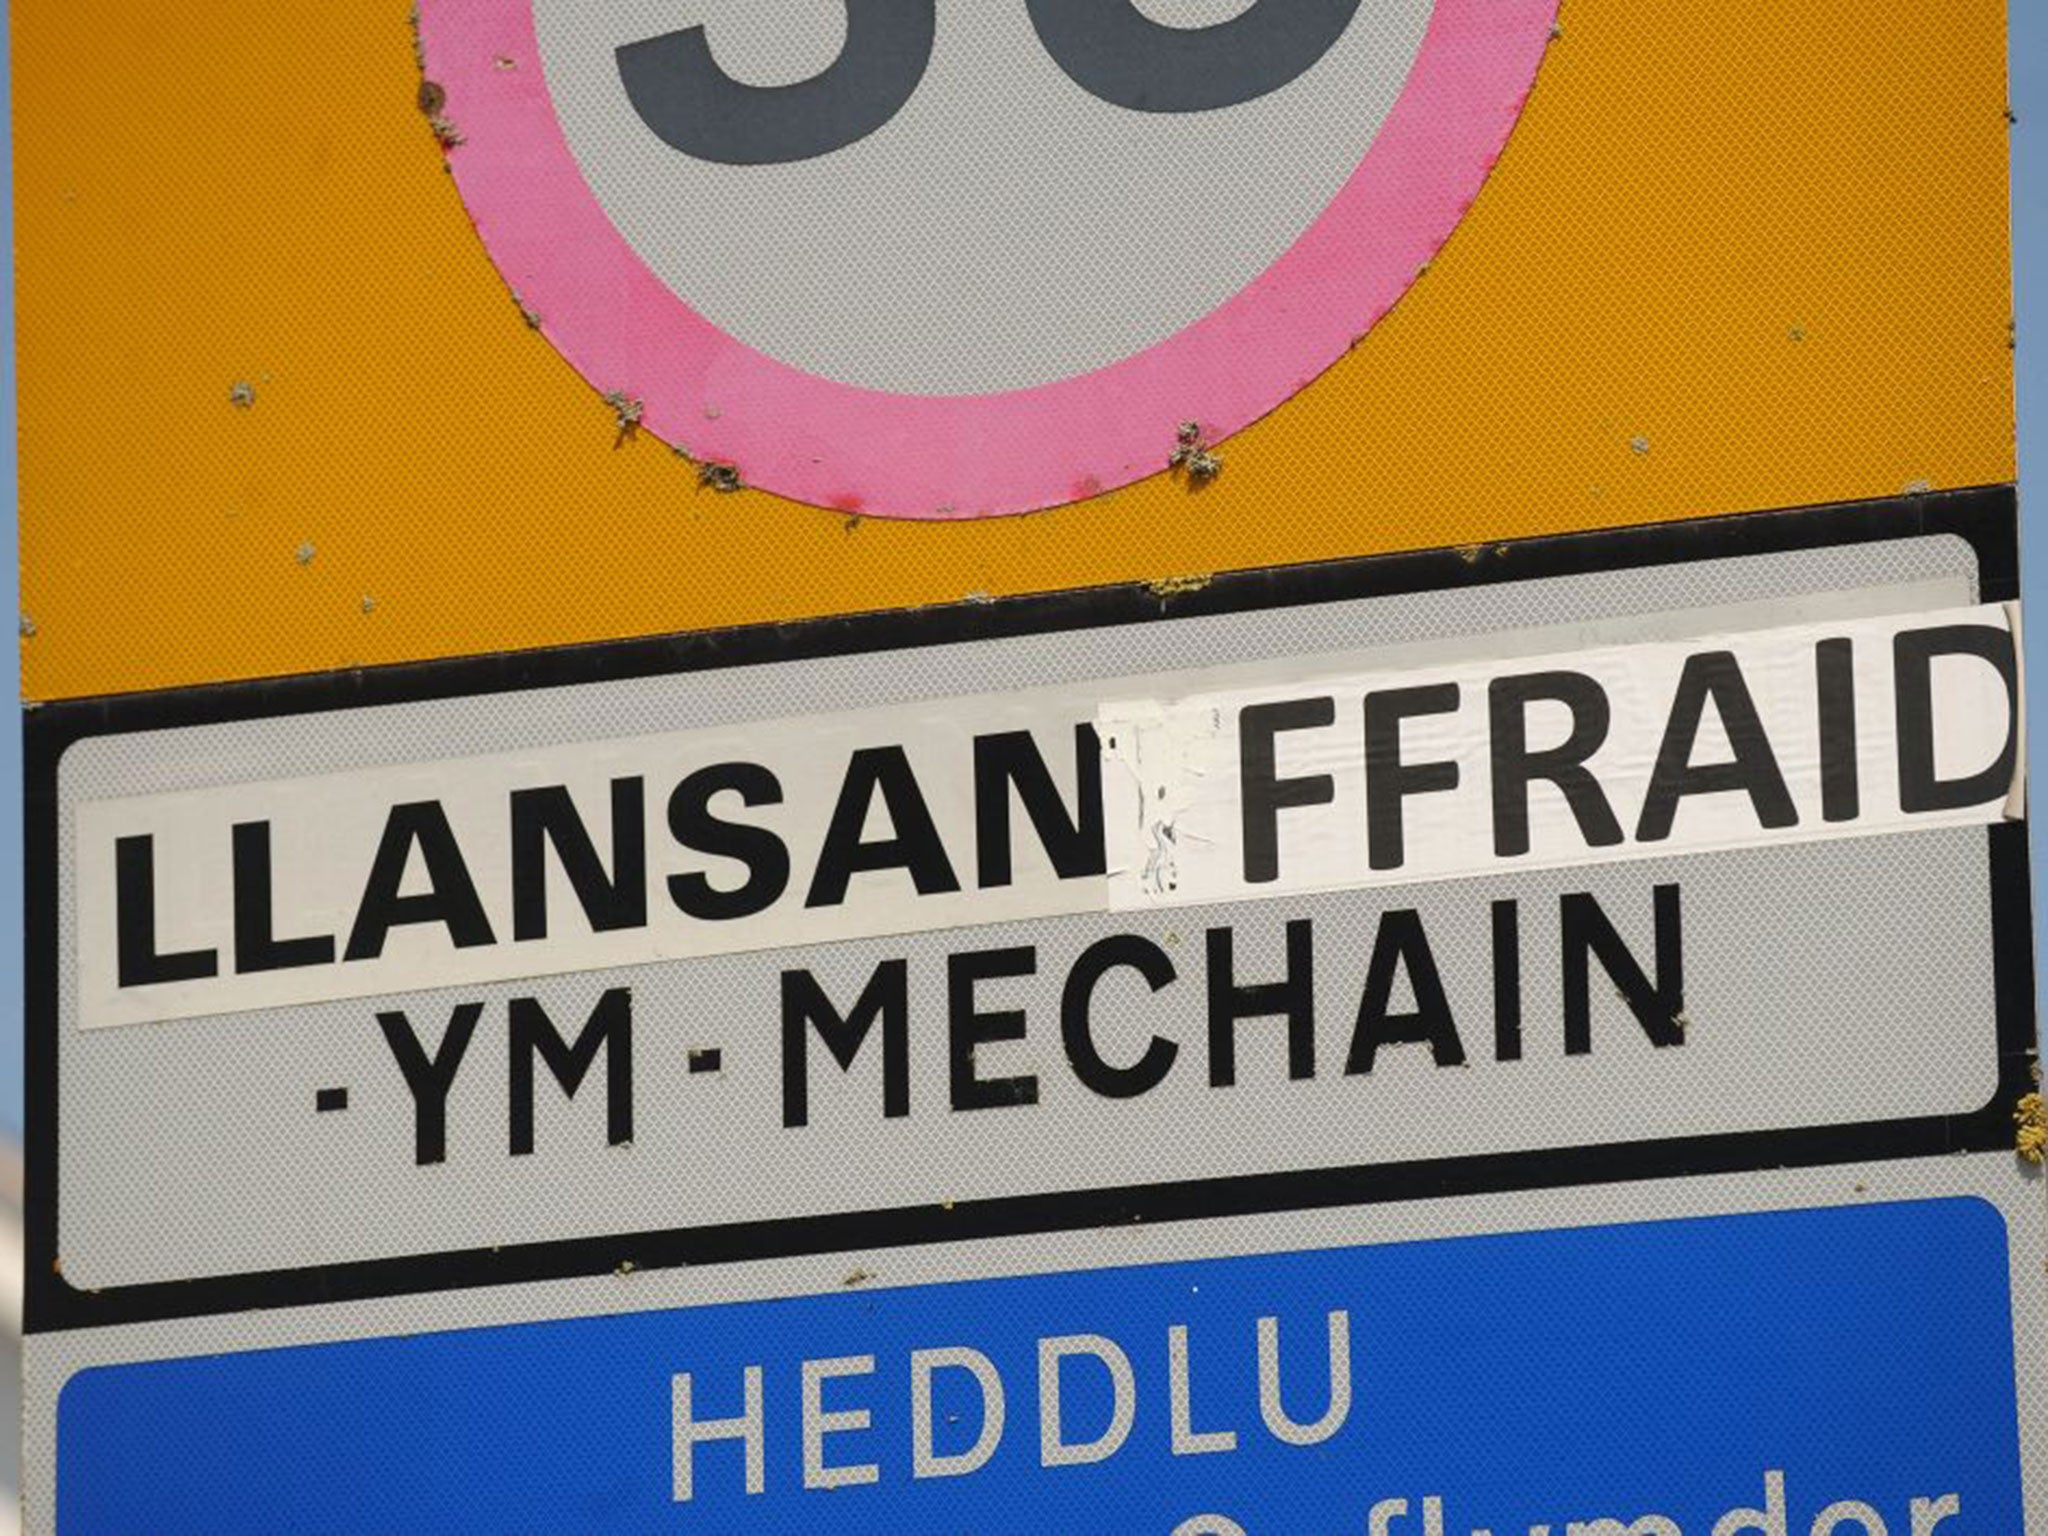 The village was originally named Llansanffraid-ym-Mechain after the Celtic female Saint Brigit, but the name was changed 150 years ago to Llansantffraid – a decision which suggests the incorrect gender of the saint